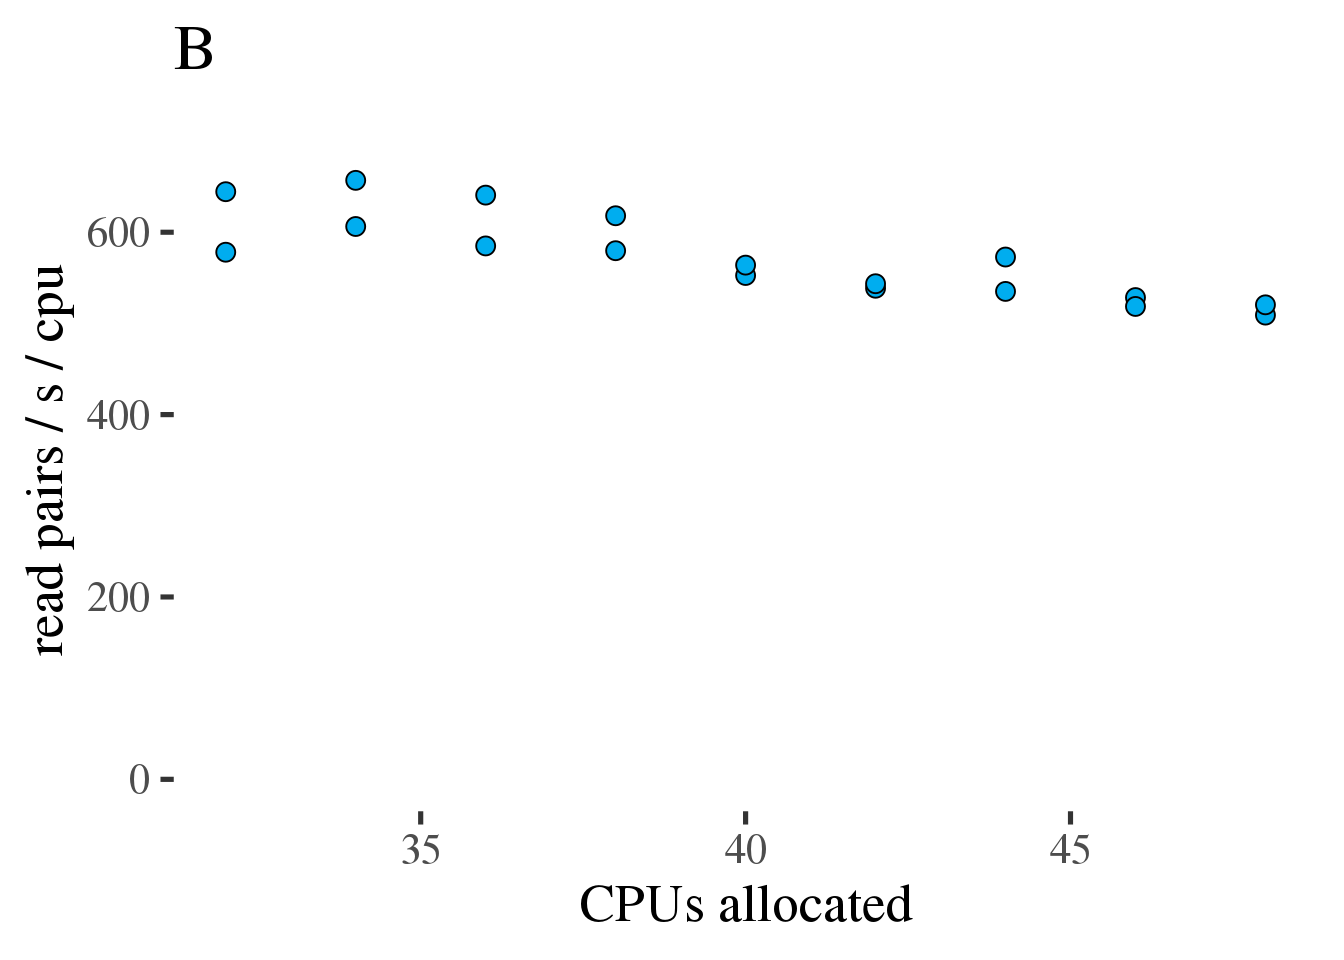 (A) Gross throughput in reads/s of the combined preprocessing pipeline from FASTQ to sorted alignments in a BAM file. The total thread count across all three tools. (B) Like the plot on the left but showing Reads/s/cpu, a measure of efficiency.